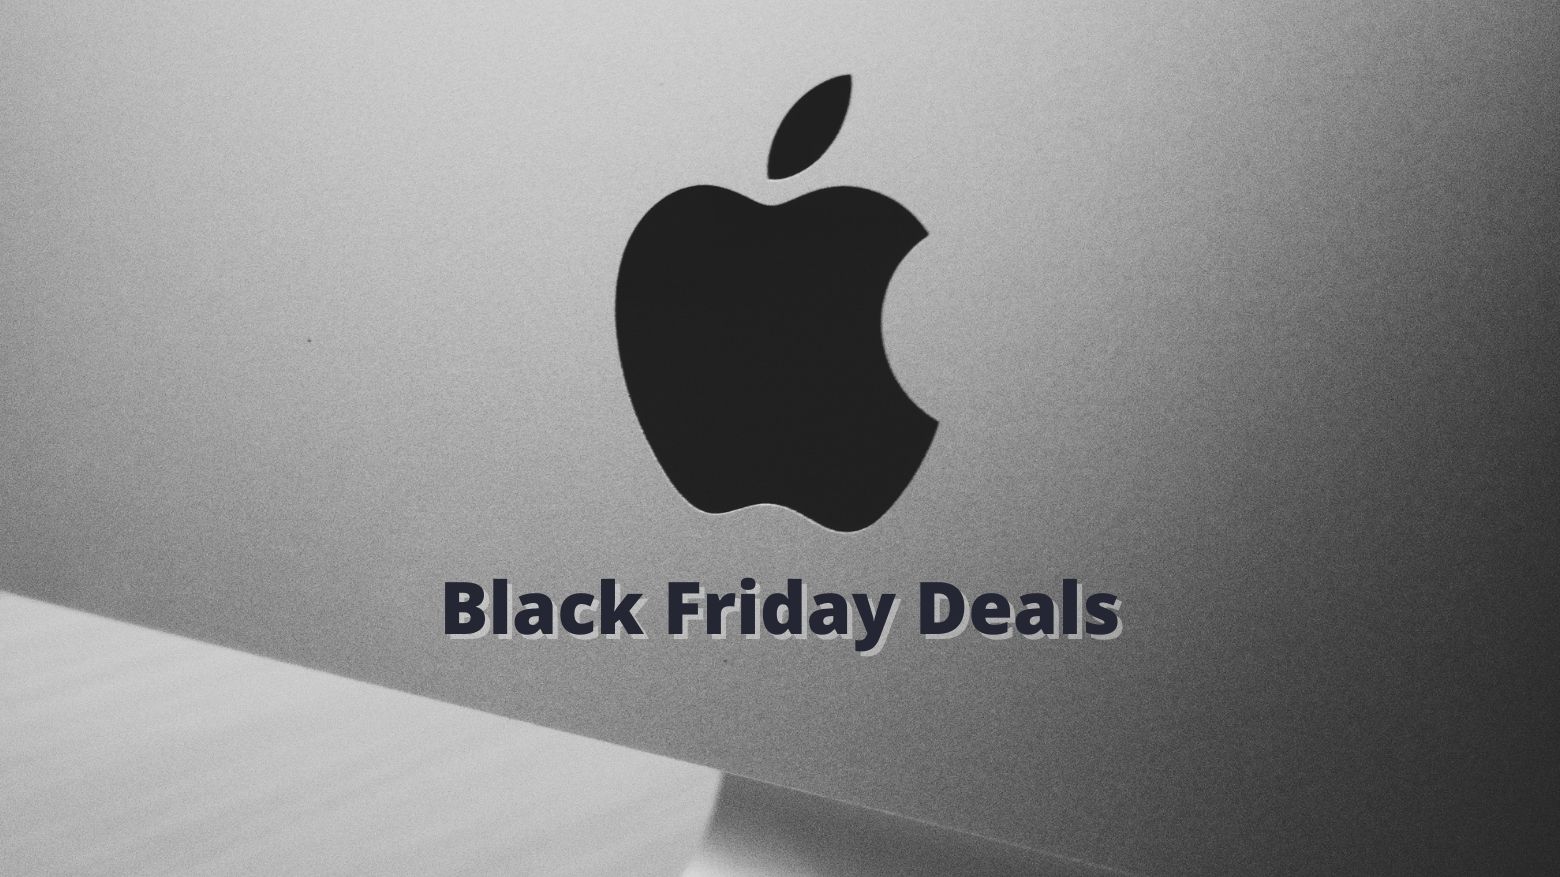 Best Black Friday deals on MacBooks, AirPods, and iPads